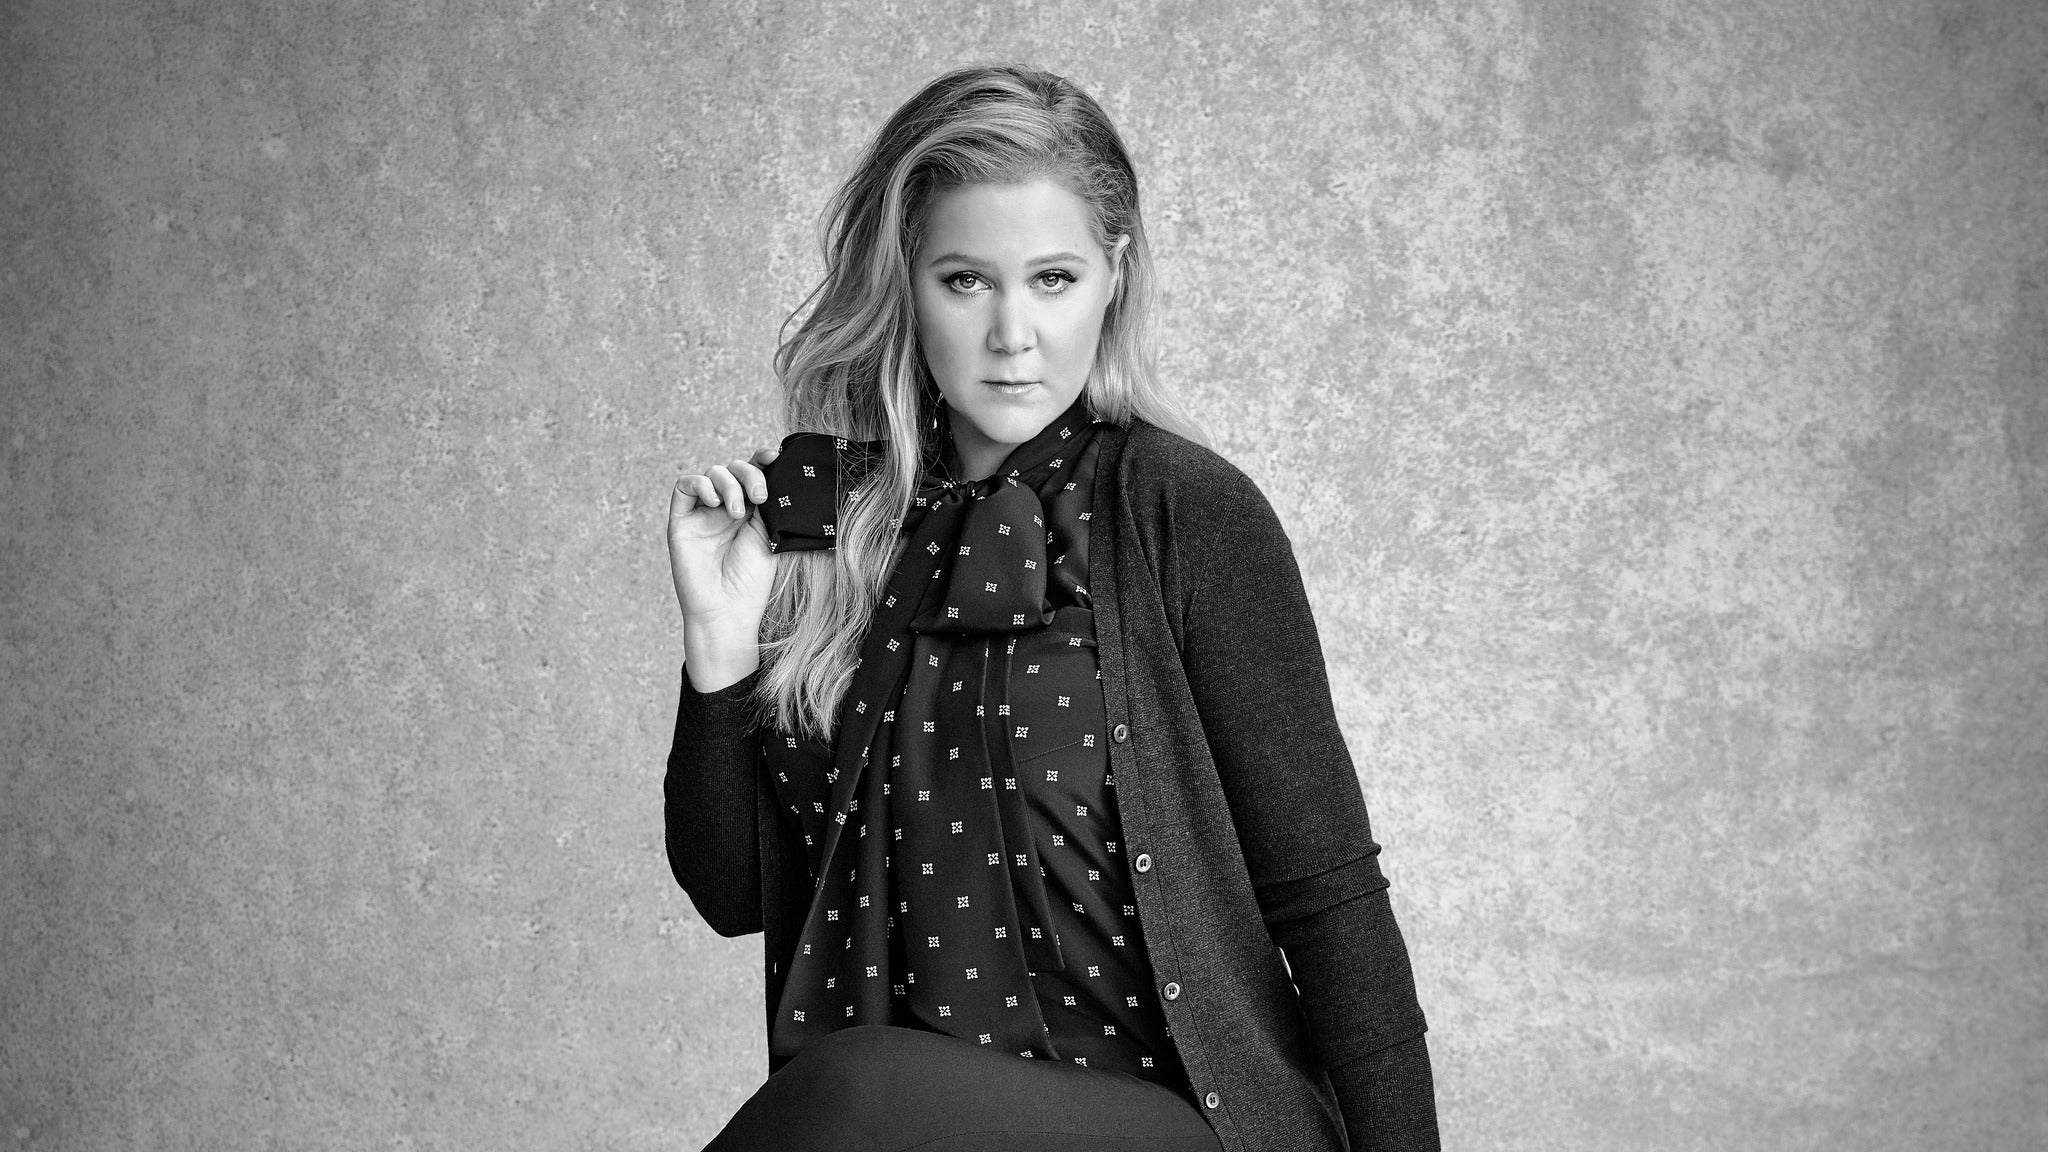 Netflix Is A Joke at The Palladium Hosted by Amy Schumer in Hollywood promo photo for "This Presale Is A Joke" presale offer code